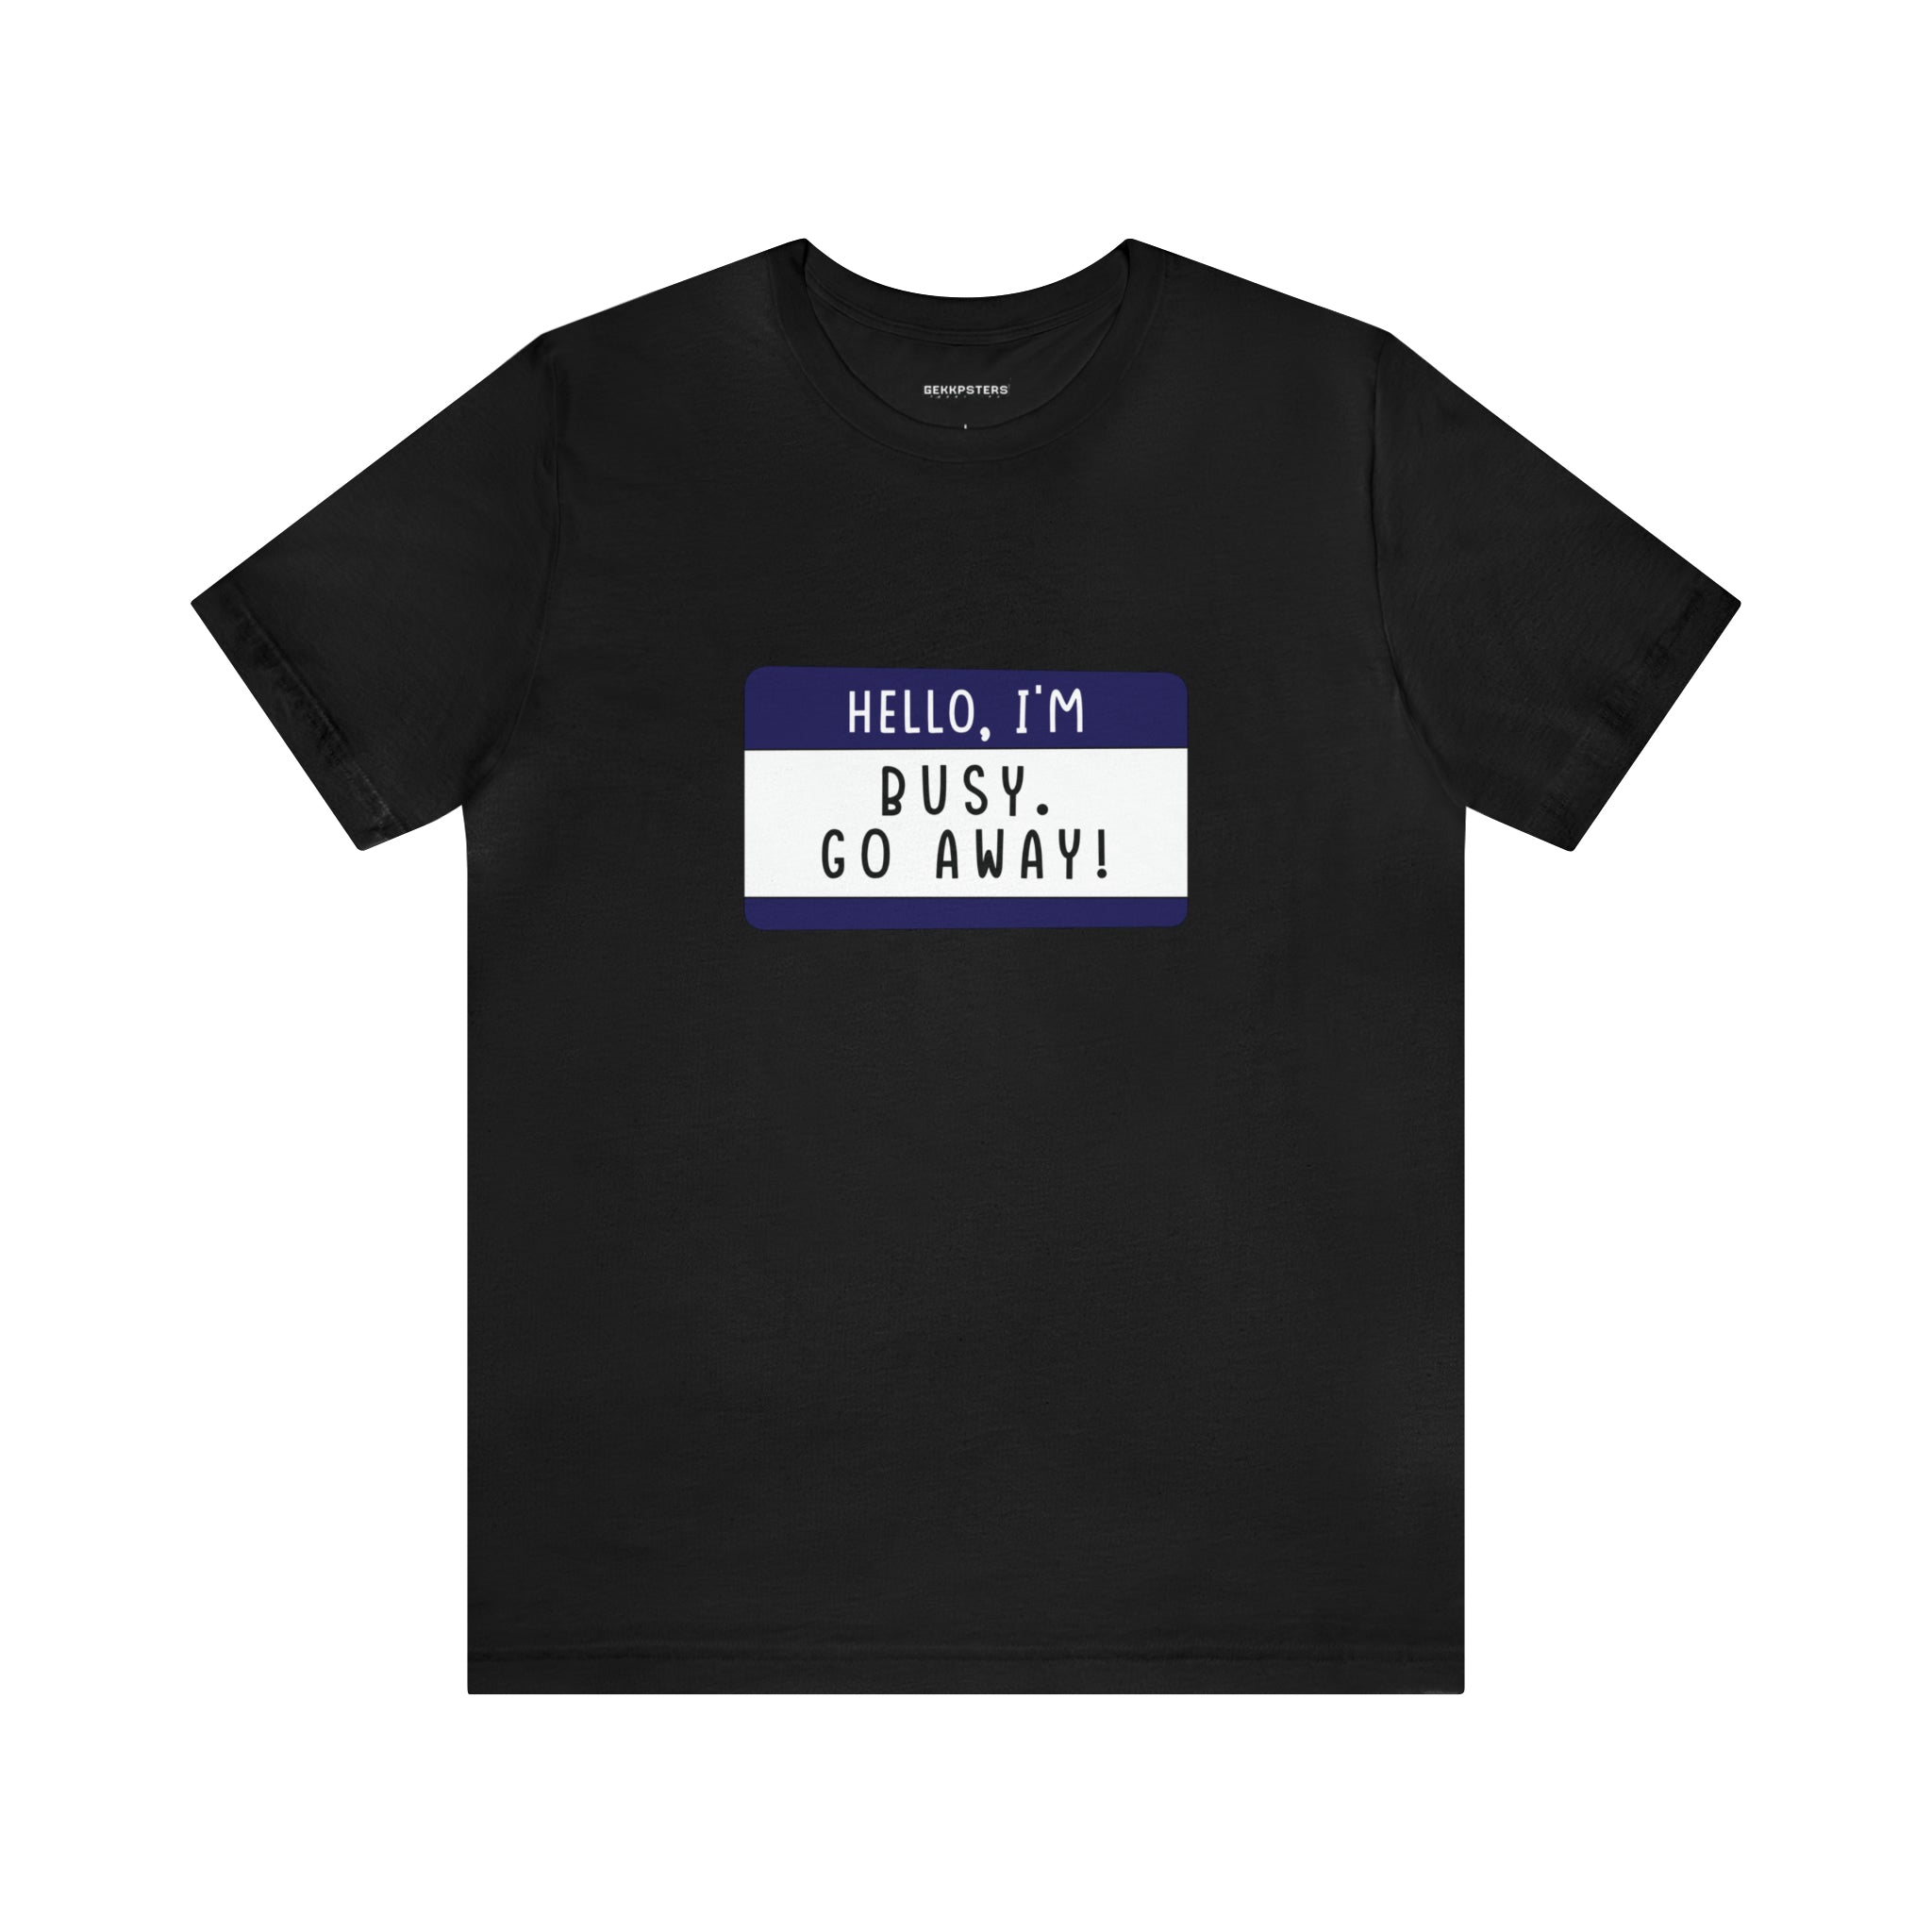 Hello, I'm Busy Go Away T-Shirt with a white rectangular graphic that reads "hello, i'm busy, go away!" in blue and black text, perfect for those seeking alone time.